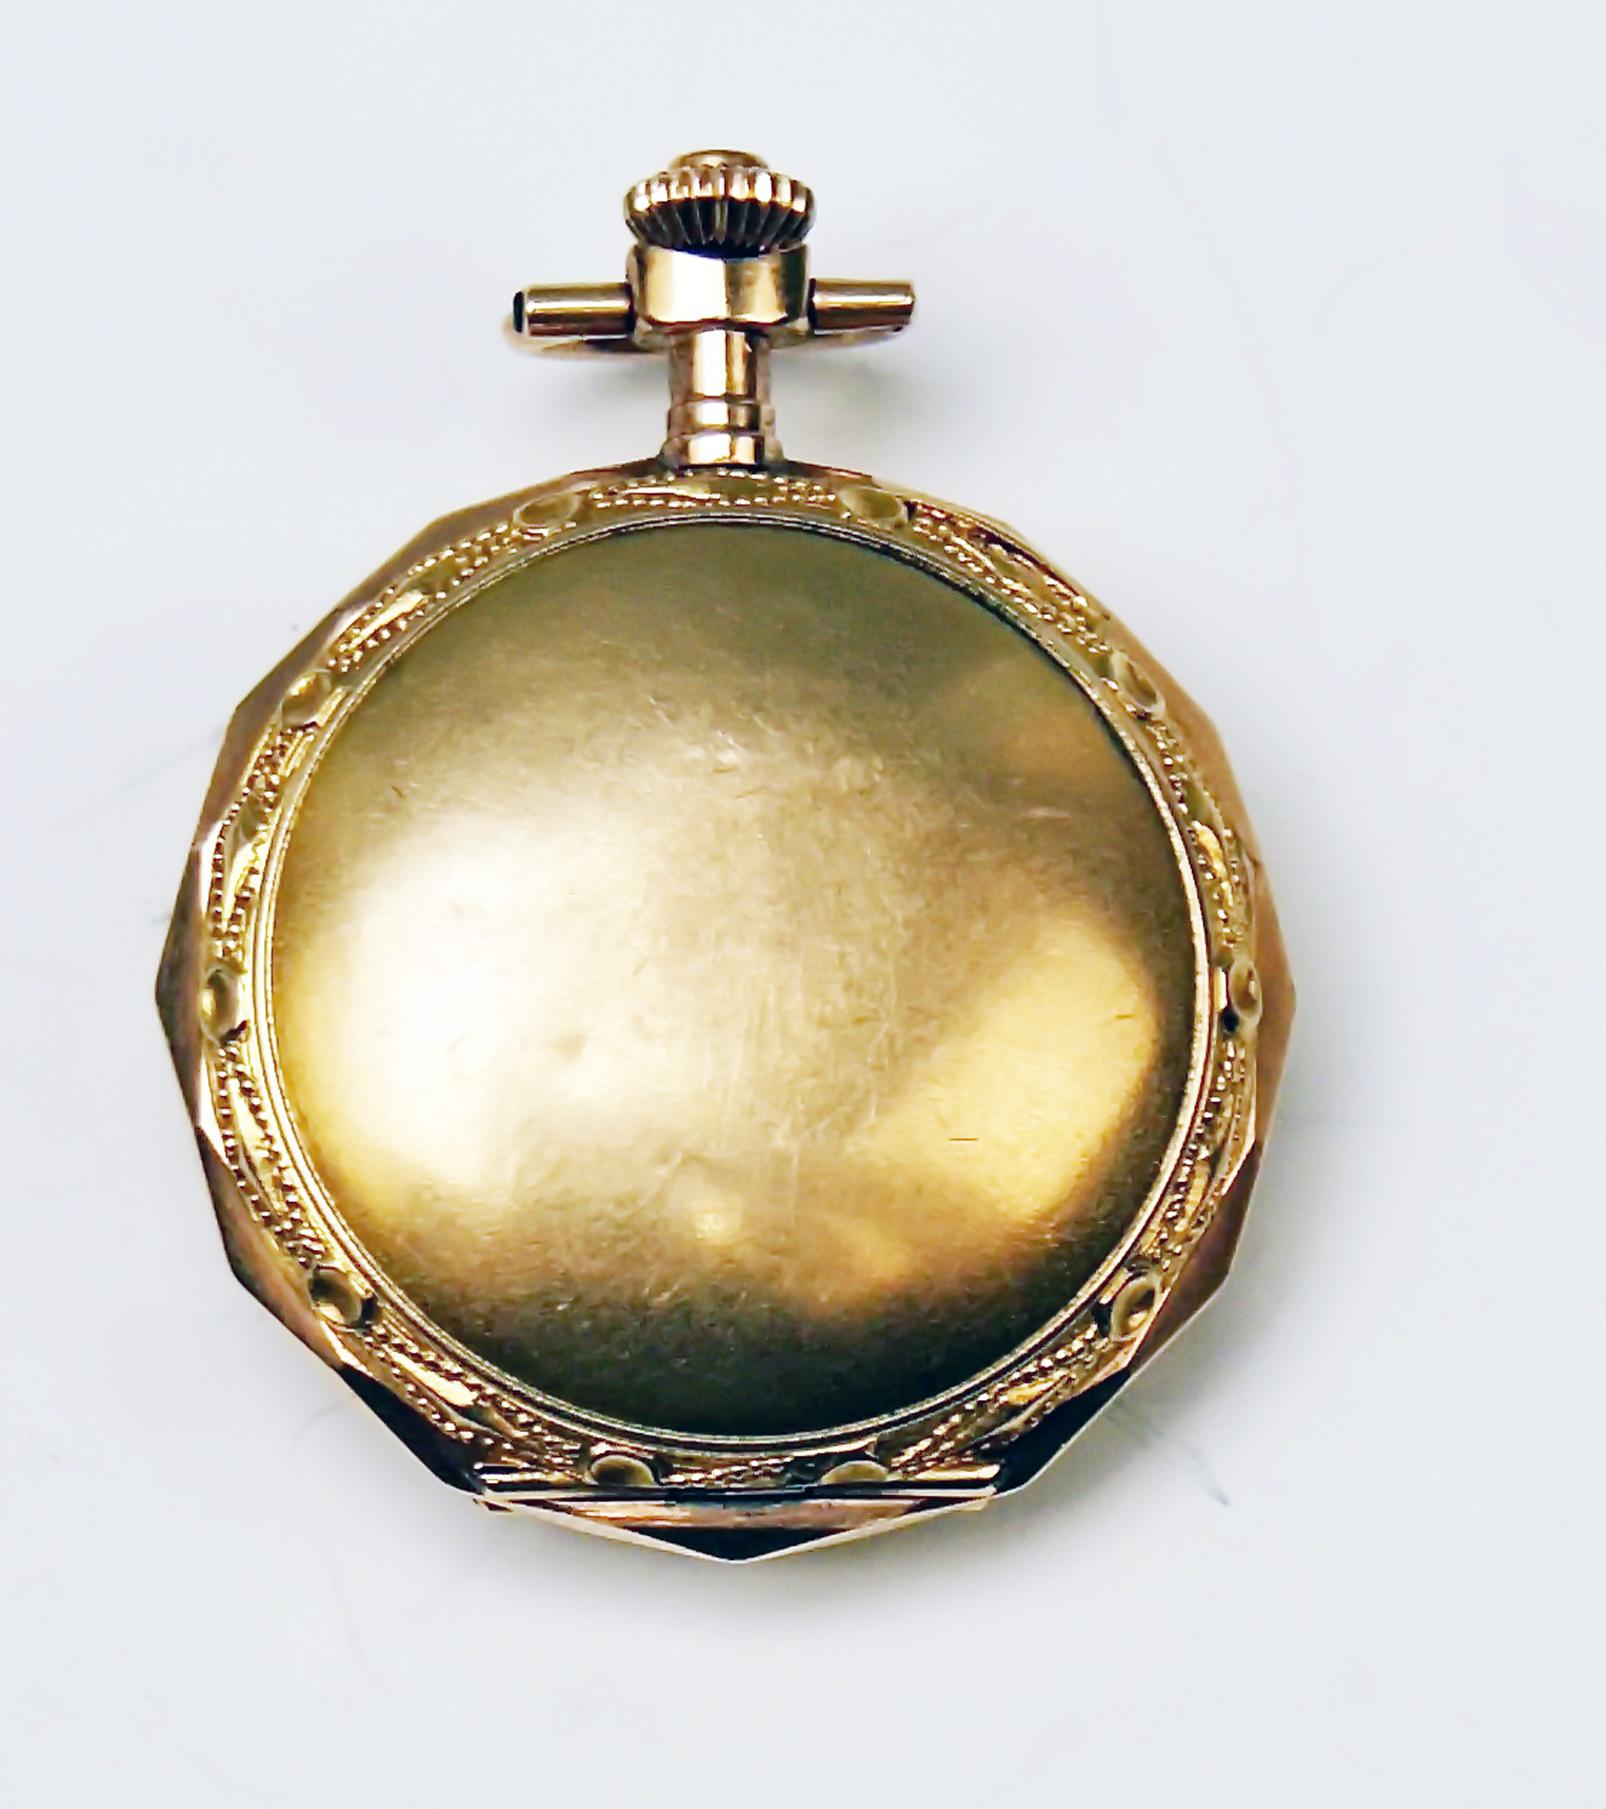 Remontoir Cylindre 10 Rubis - 2 For Sale on 1stDibs | remontoir cylindre 10  rubis value, remontoir 10 rubis pocket watch, remontoir cylindre 10 rubis  cena